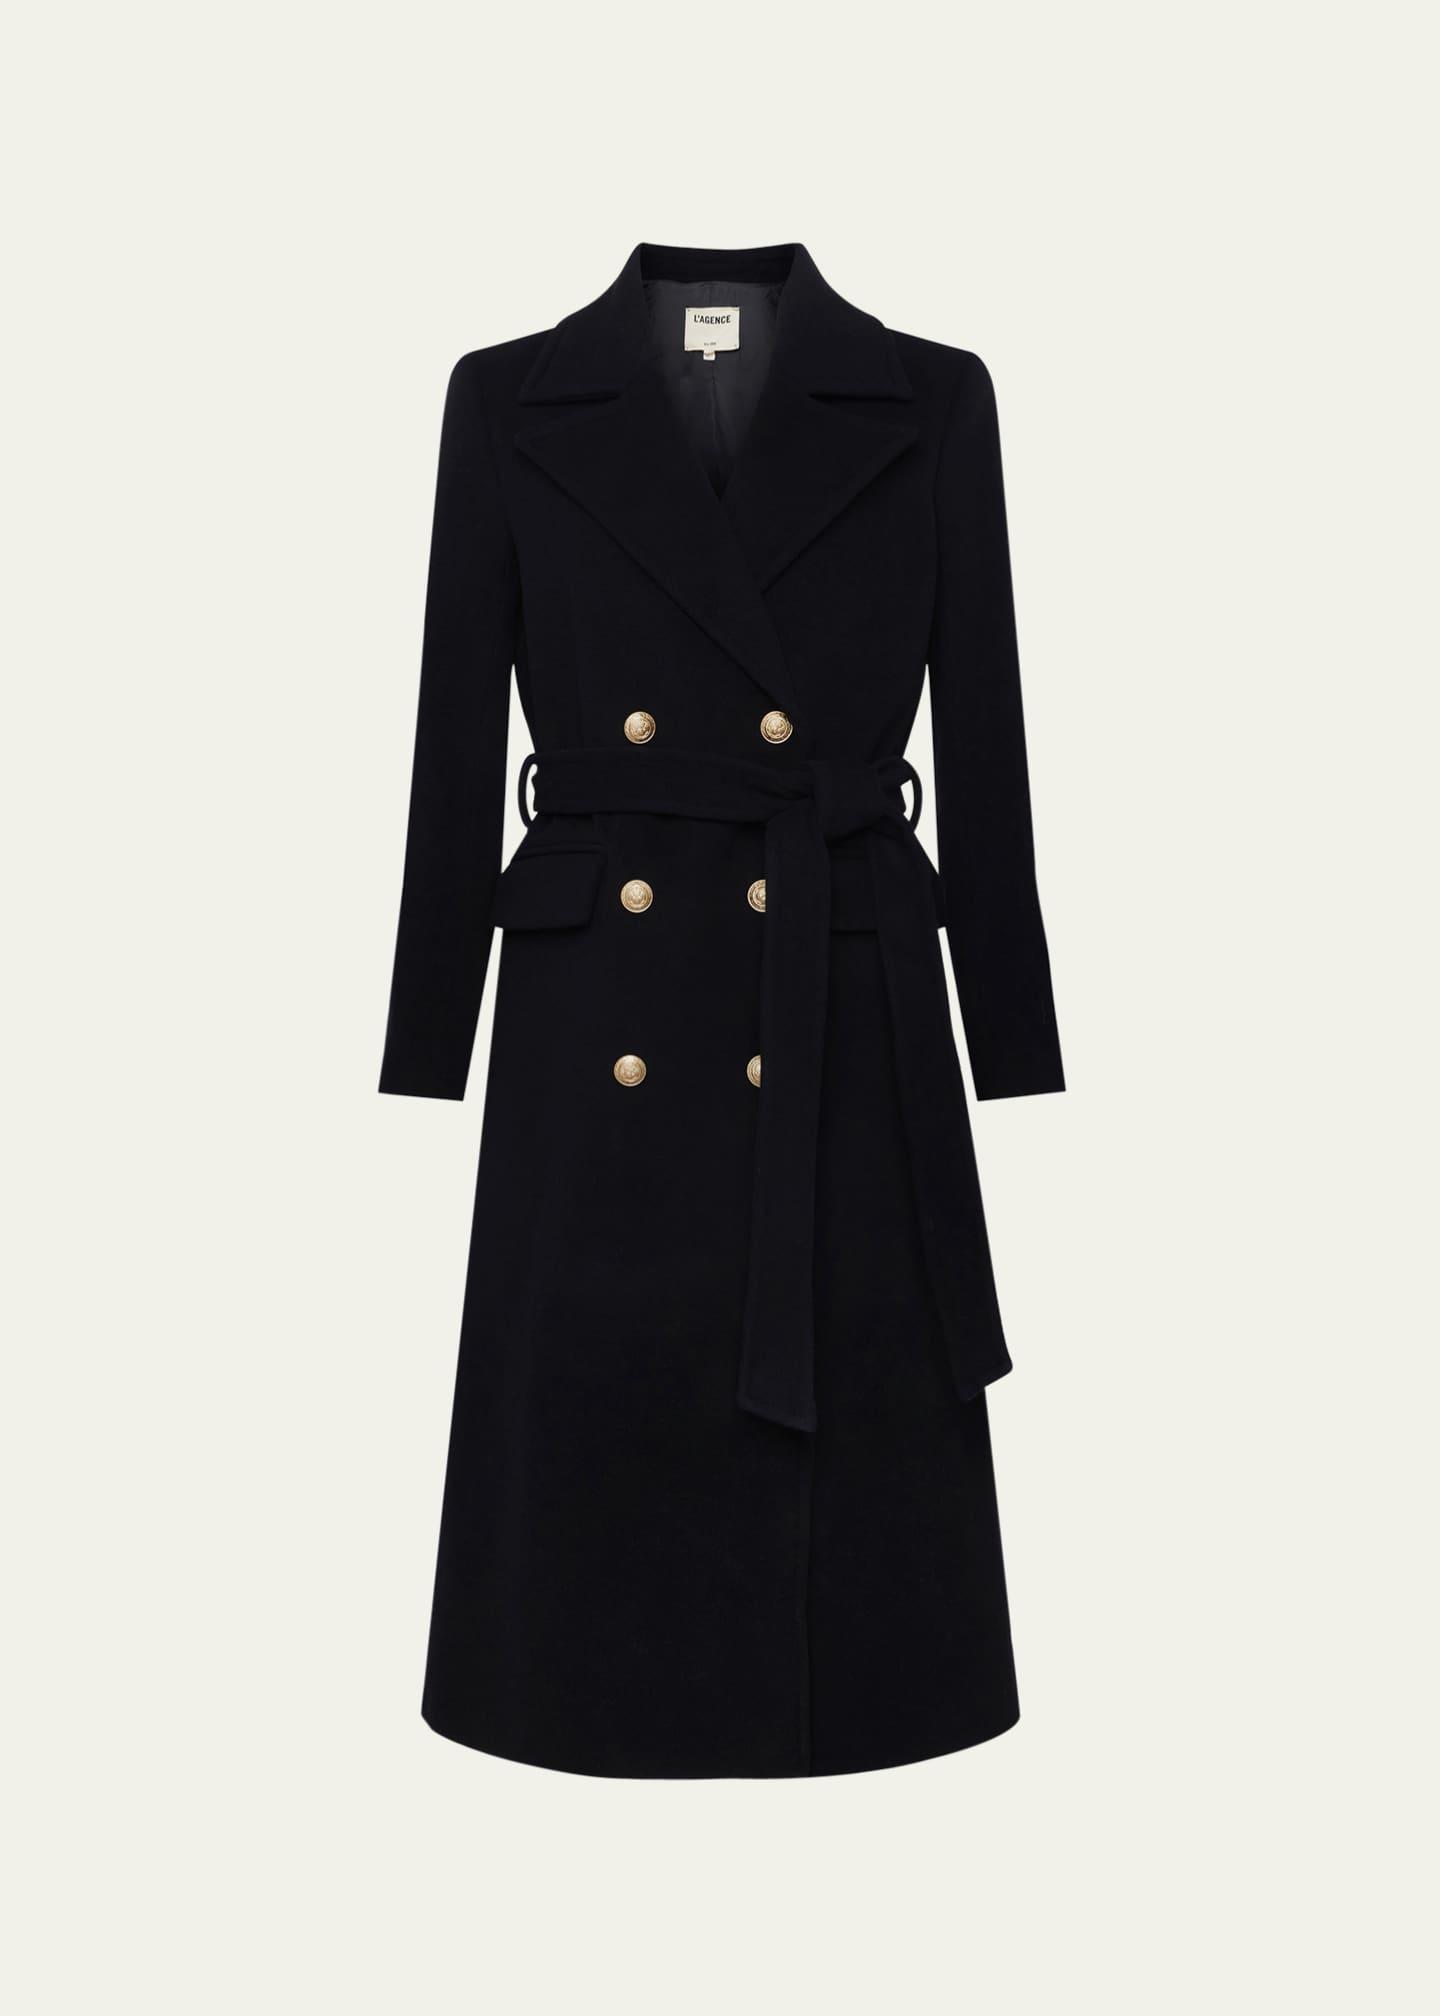 L'Agence Olina Double-Breasted Belted Coat - Bergdorf Goodman